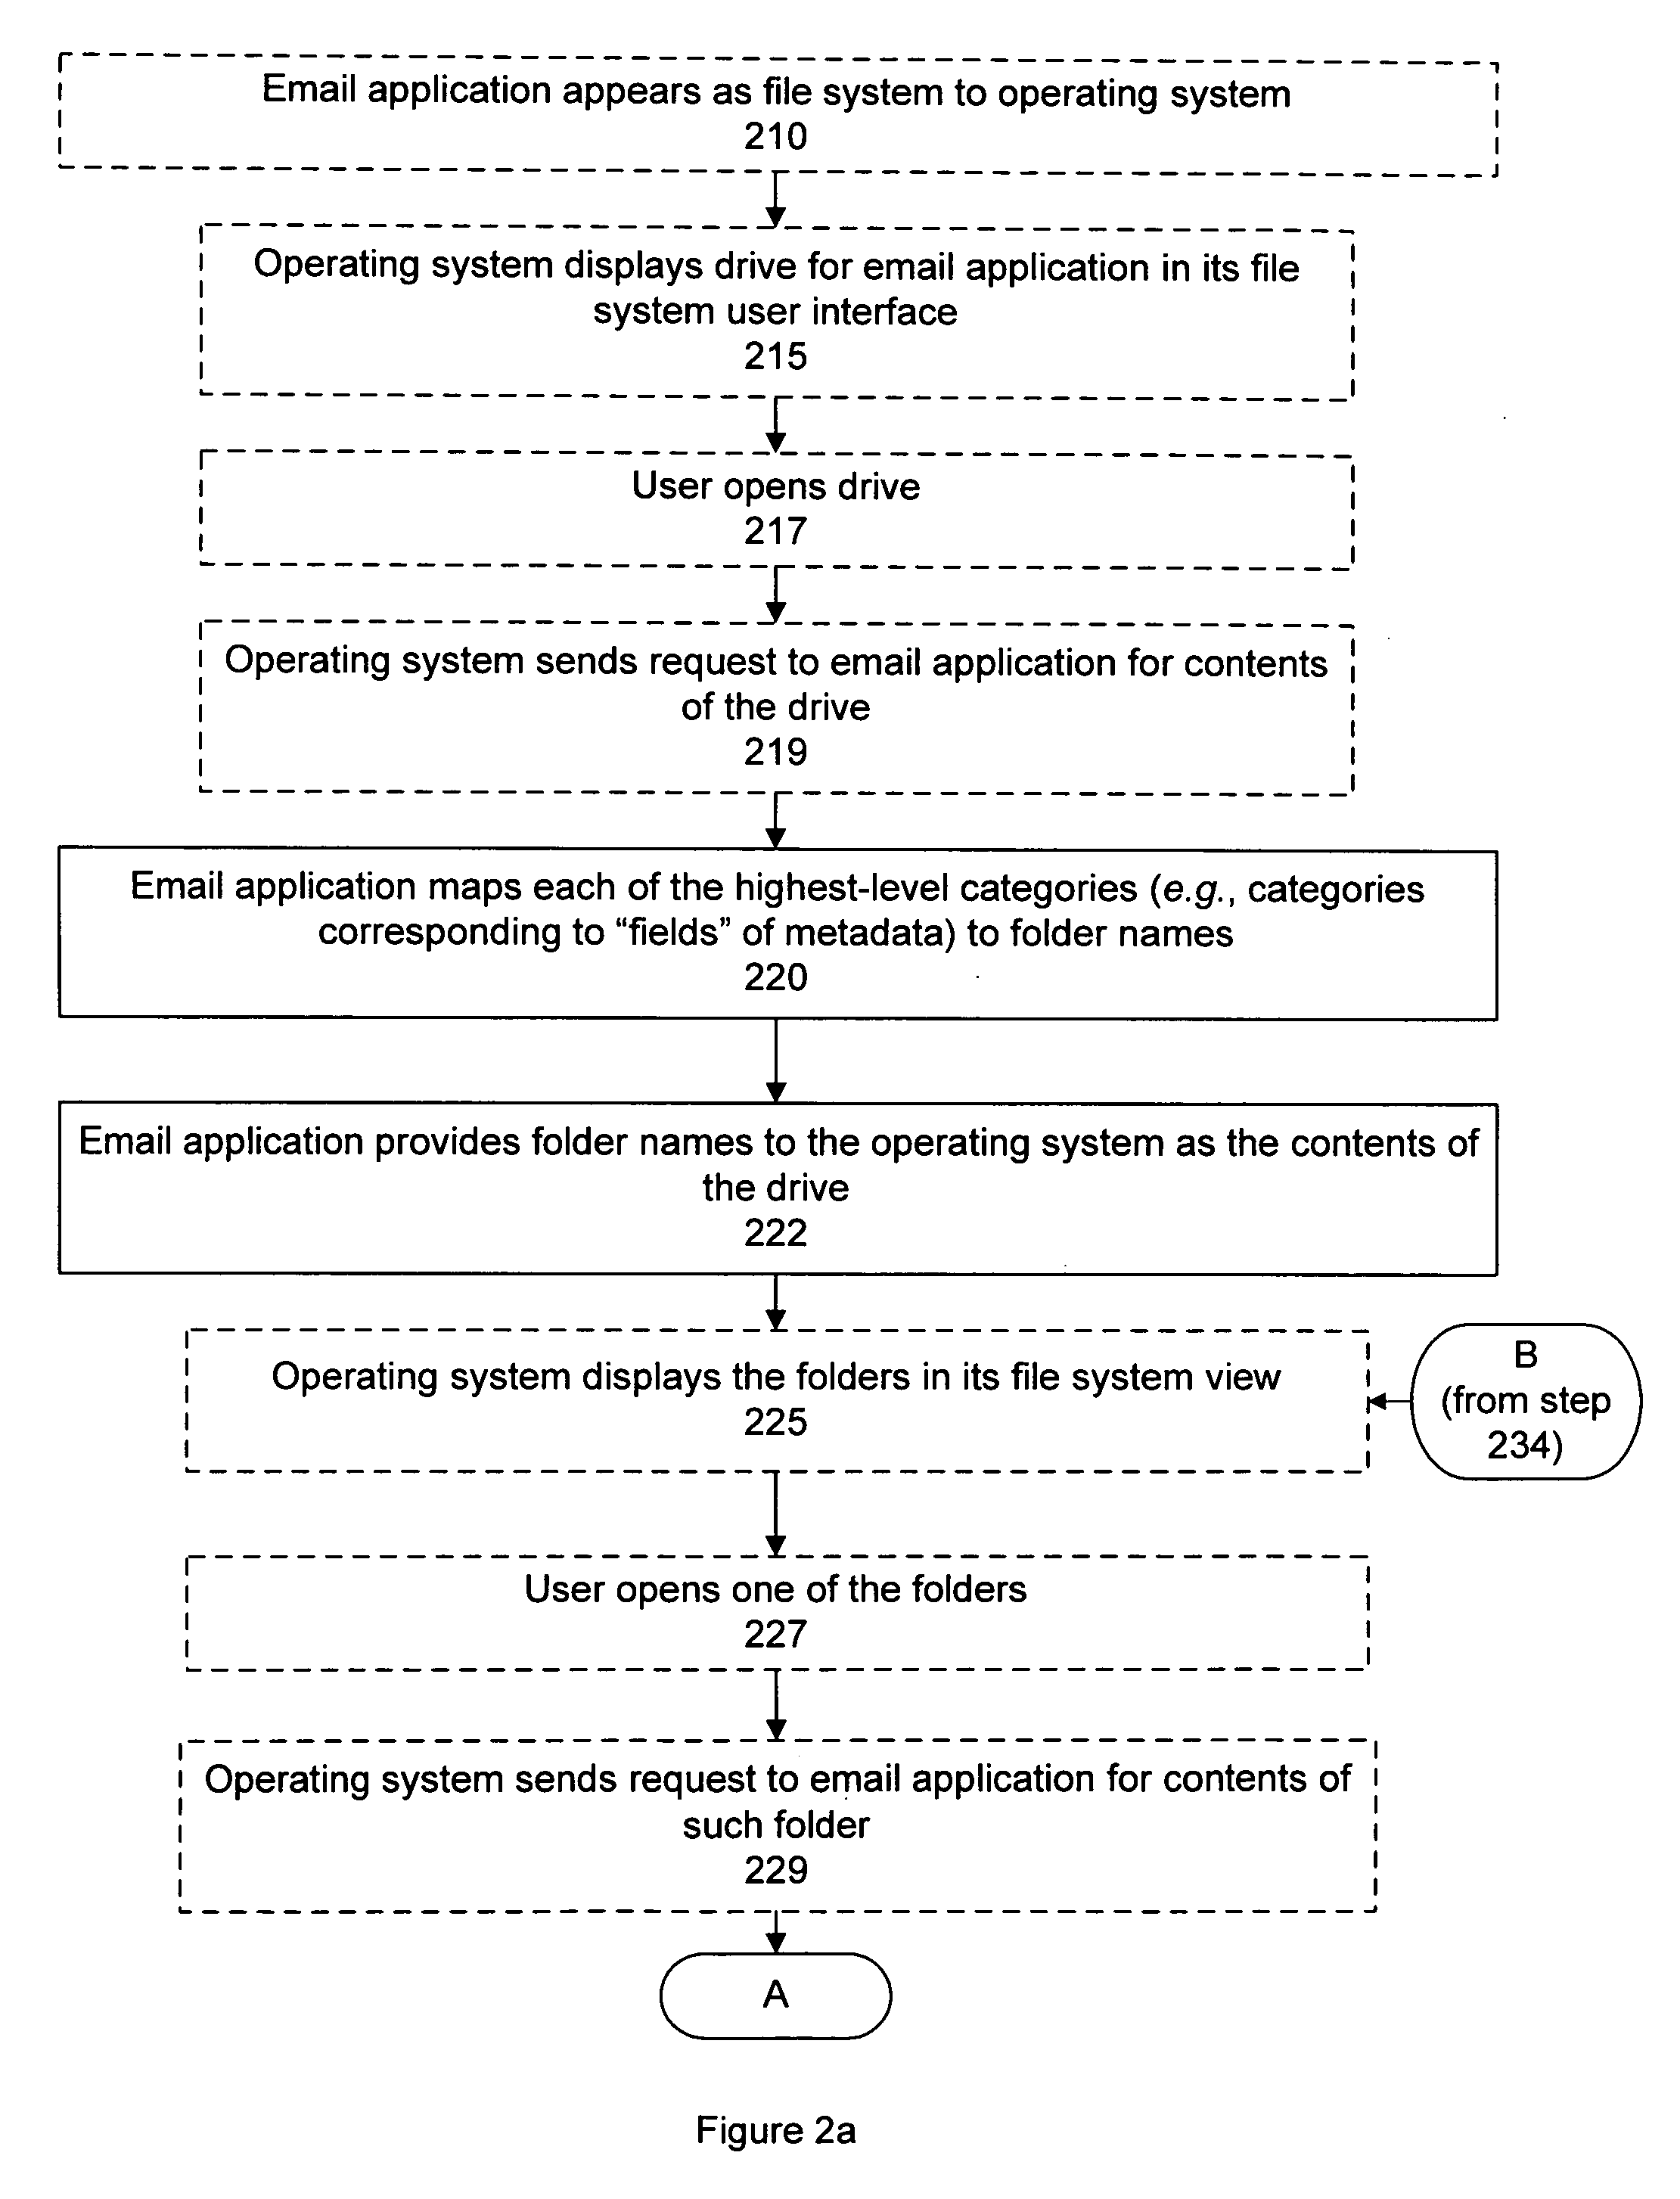 System and method for enabling an external-system view of email attachments